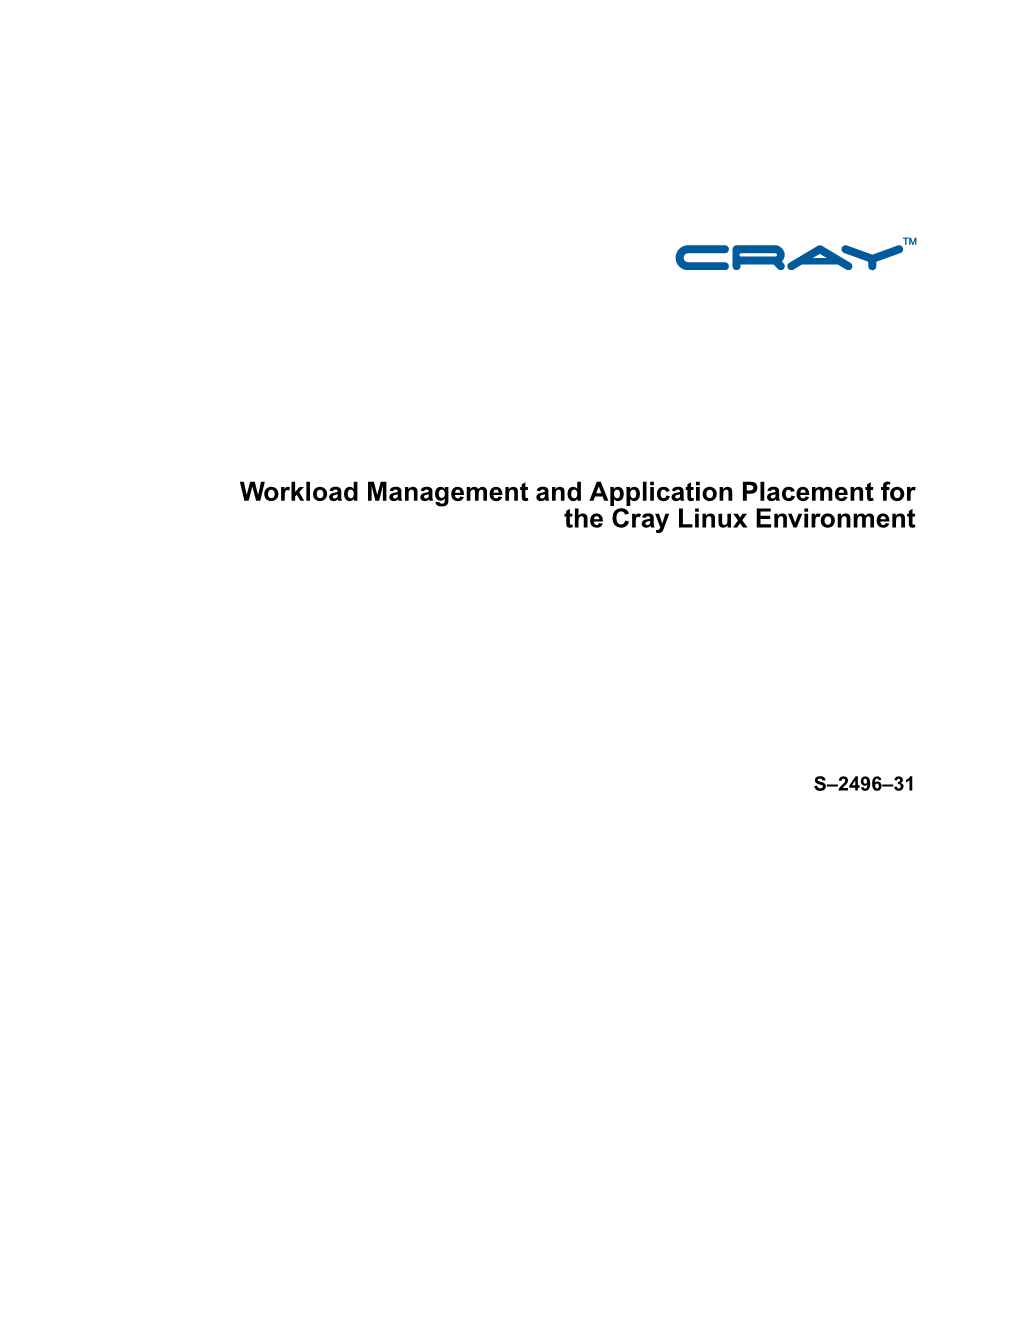 Workload Management and Application Placement for the Cray Linux Environment